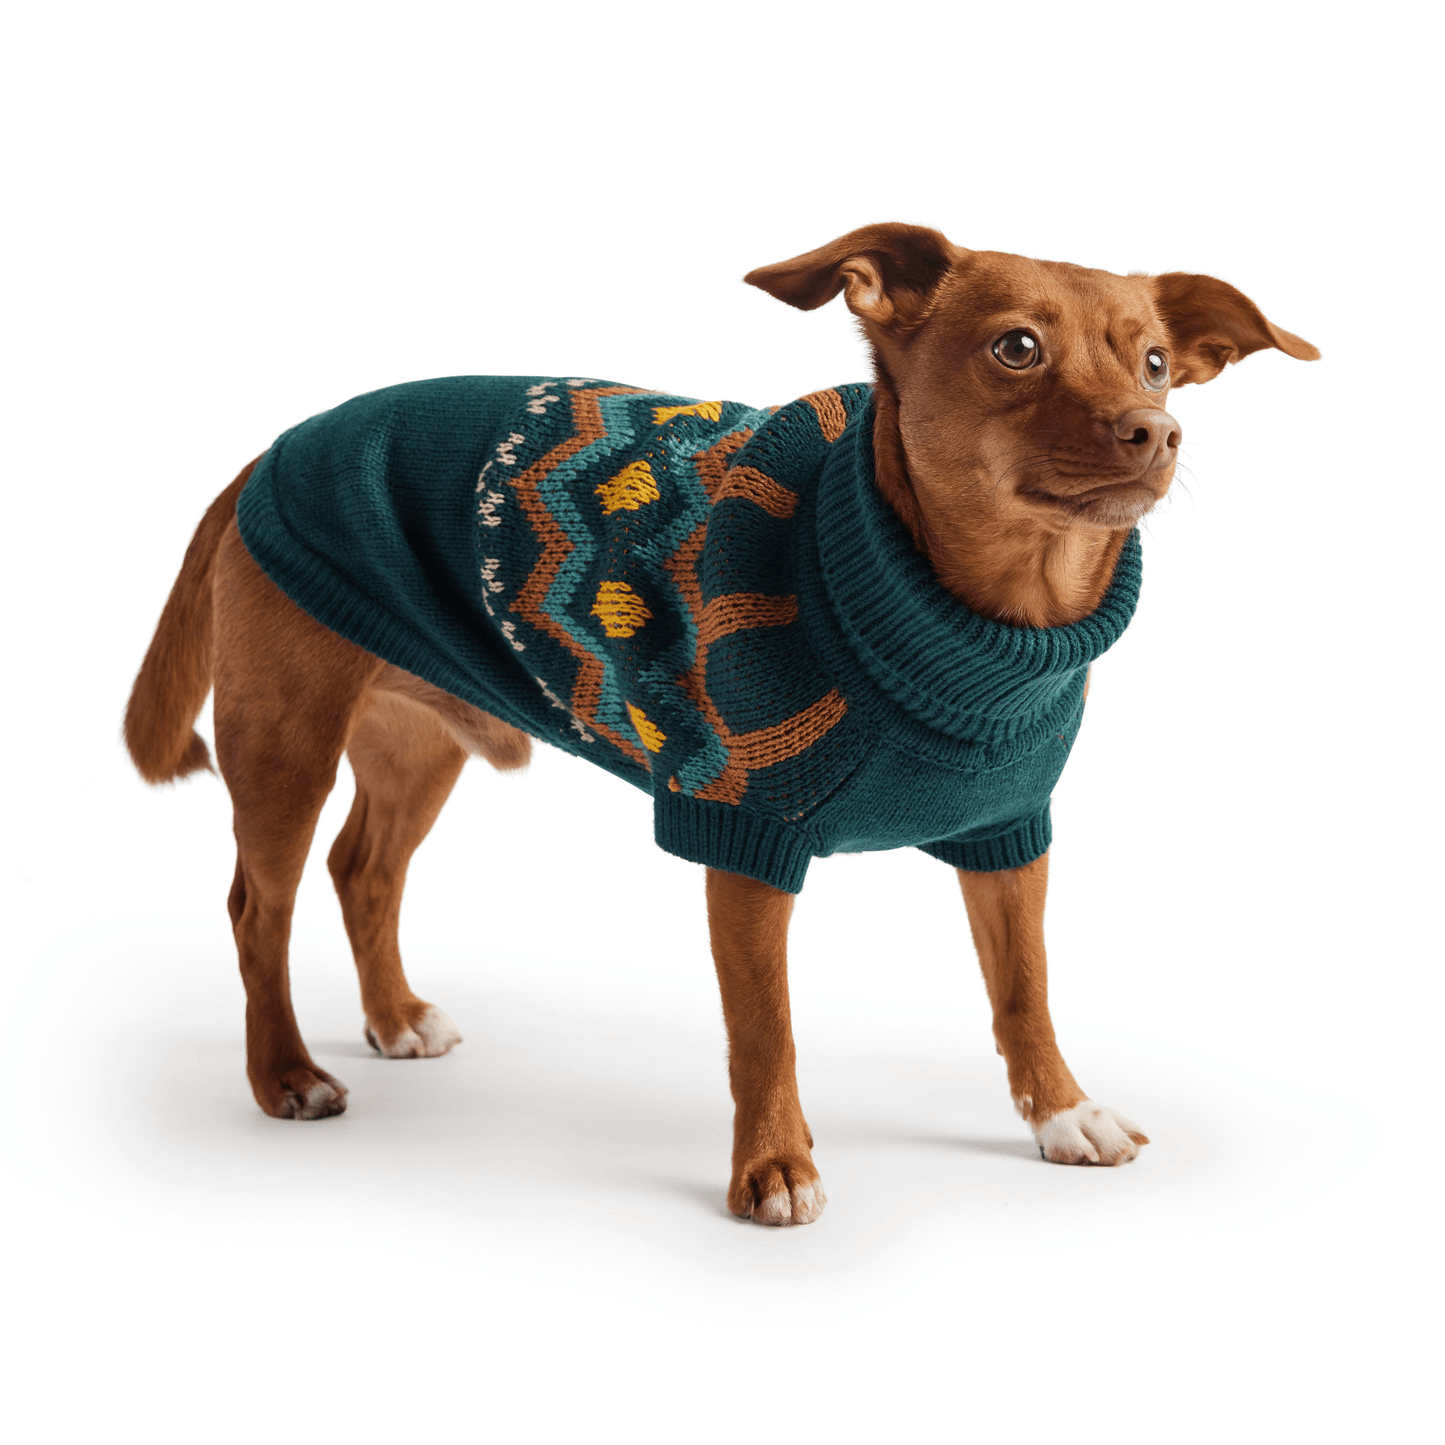 Dog and Pet Stuff Heritage Sweater - Teal